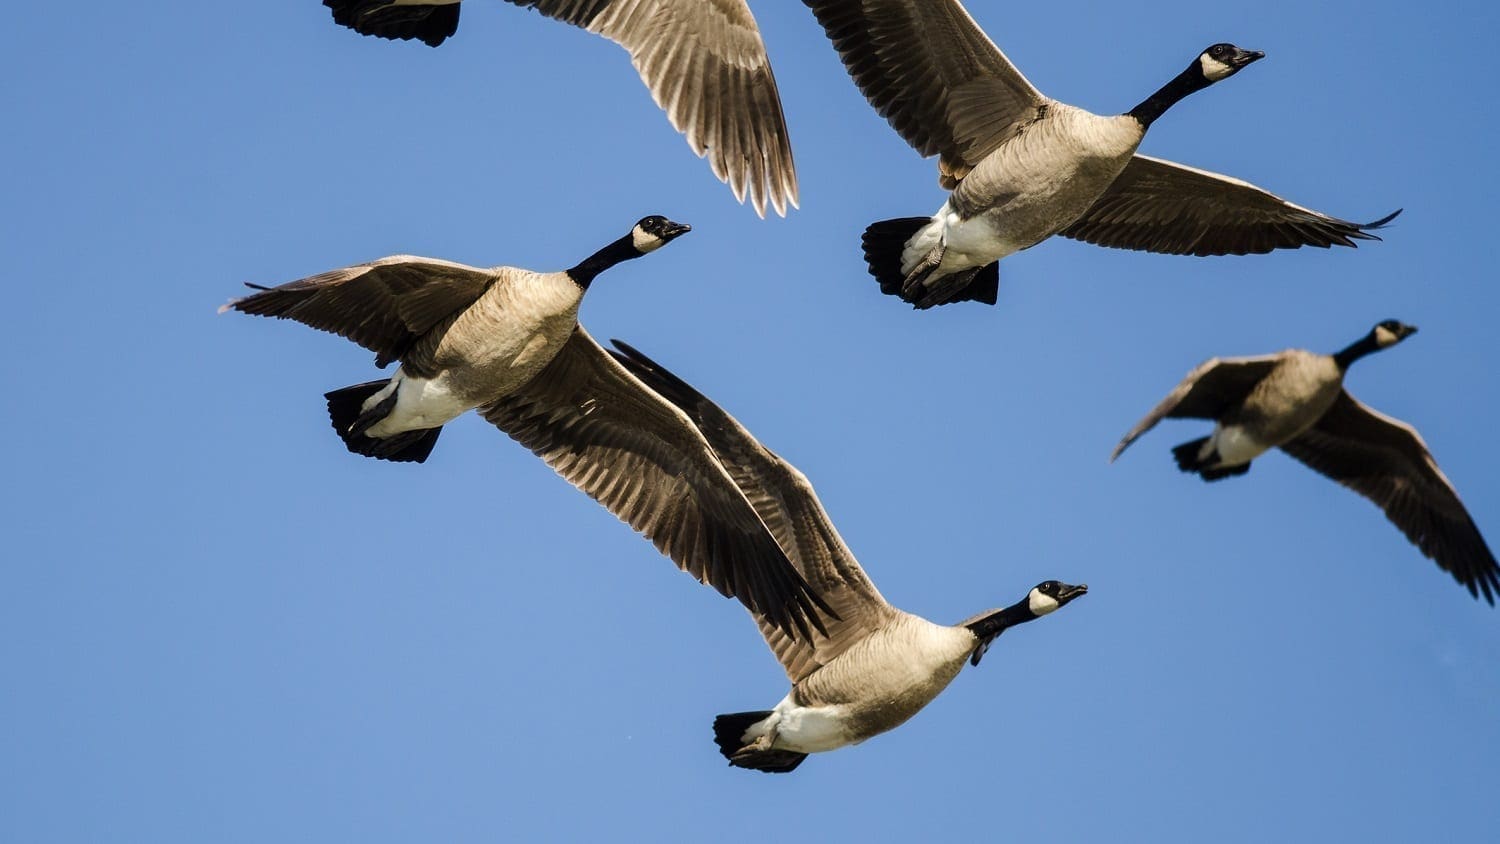 Canada Geese flying in formation: Photo 114363306 © Rck953 | Dreamstime.com